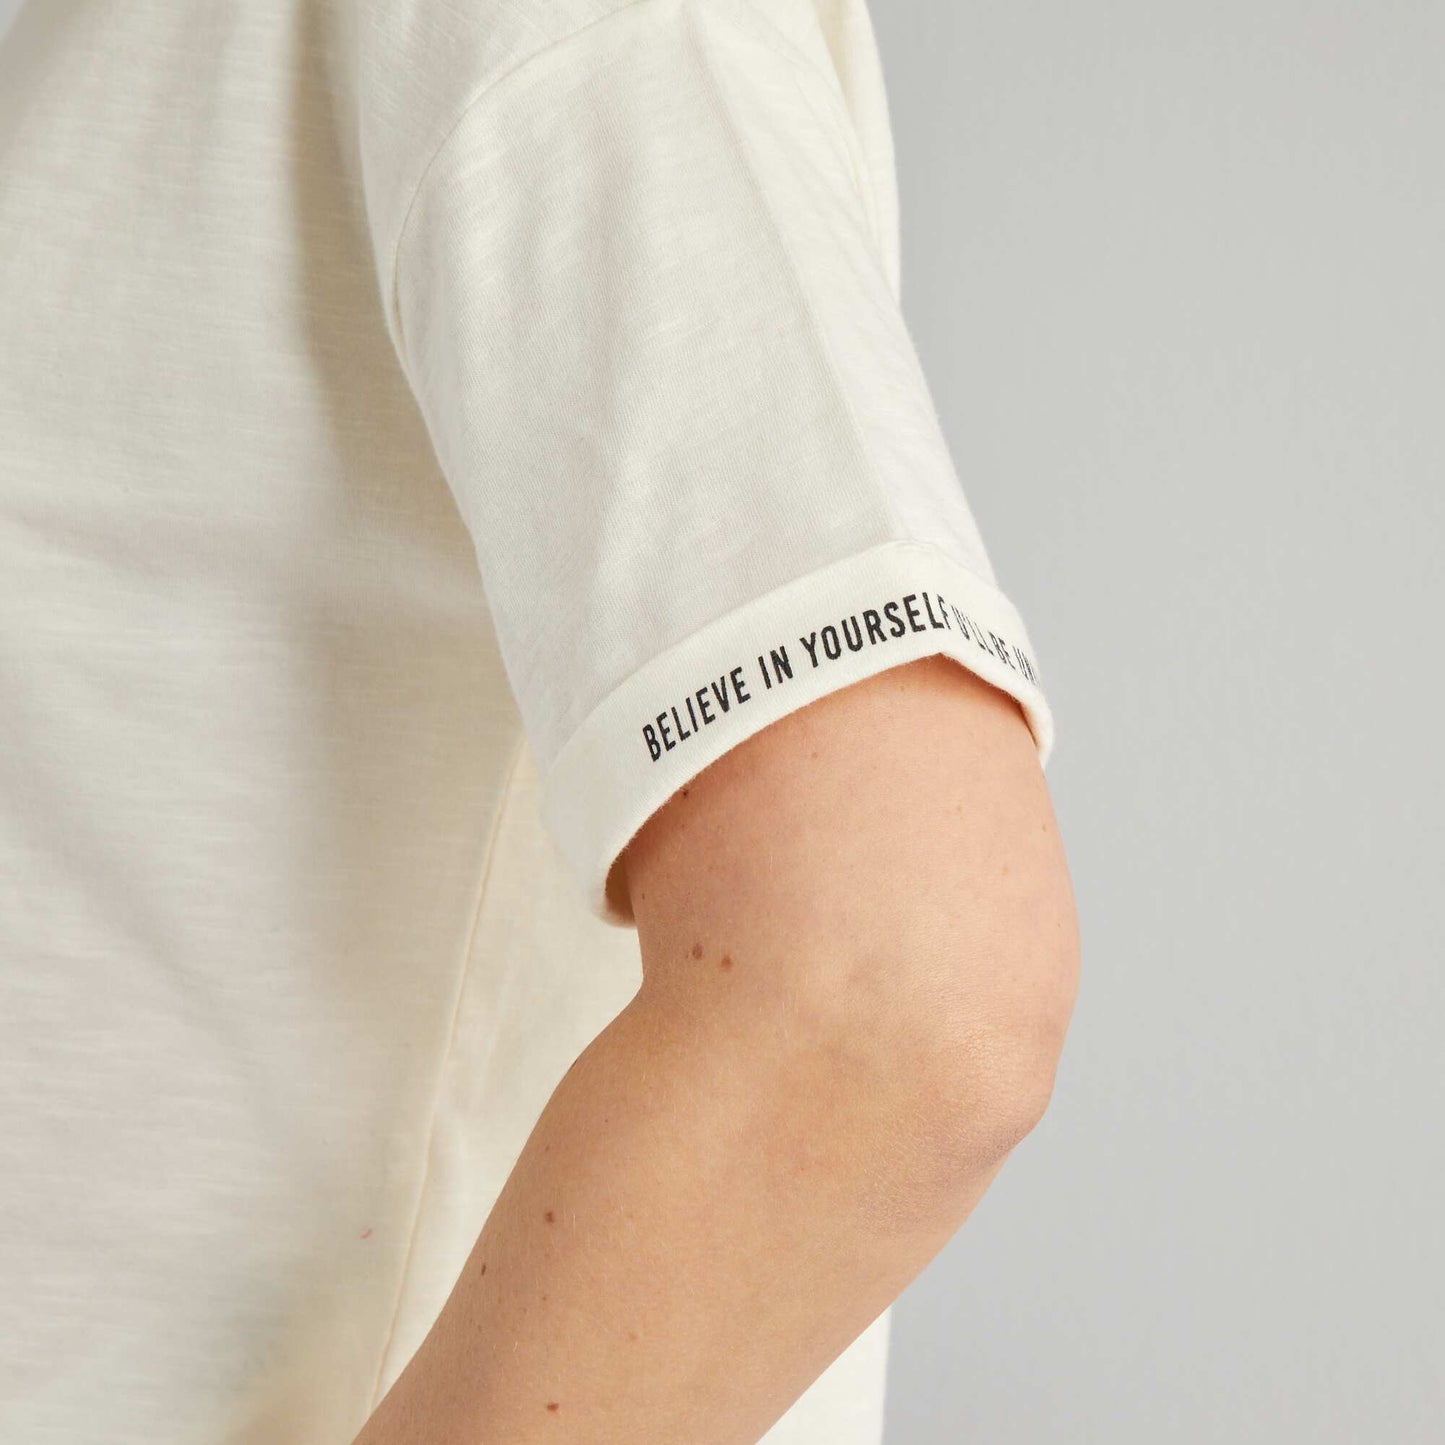 T-shirt with boxy sleeves WHITE